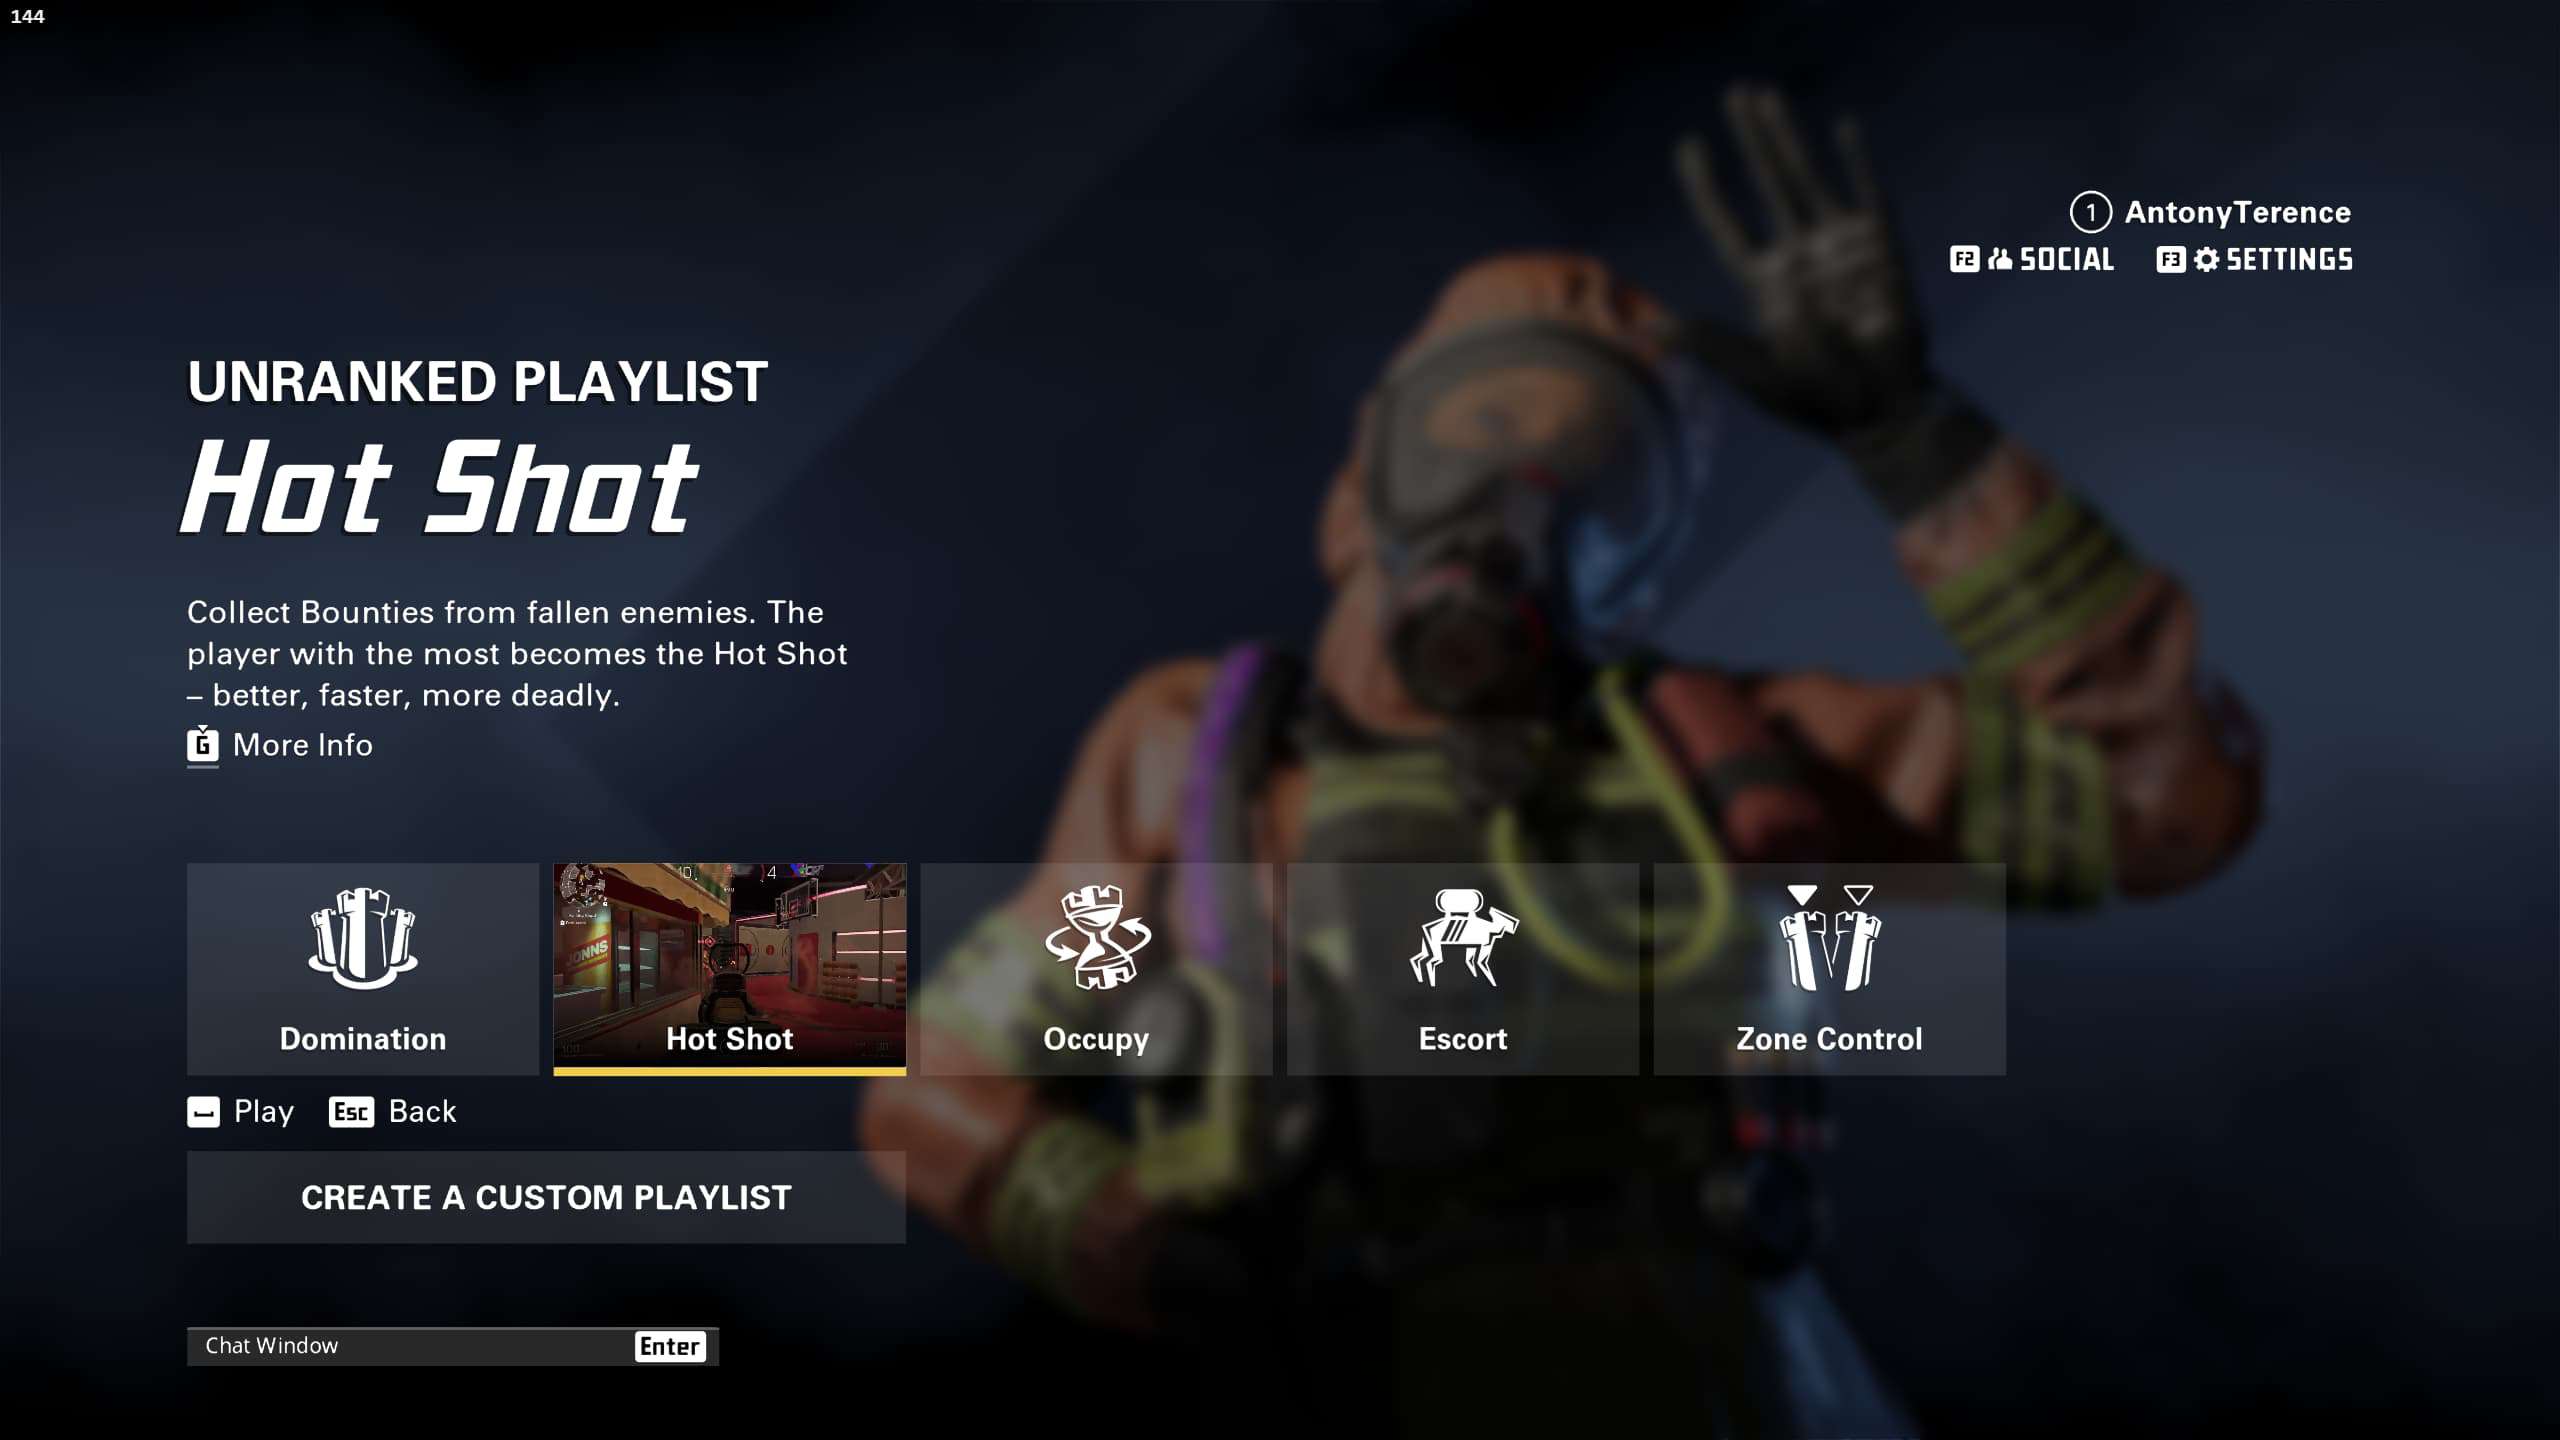 The XDefiant game menu features an unranked playlist called "Hot Shot" with game modes like Domination, Hot Shot, Occupy, Escort, and Zone Control. On the right, a character in a gas mask raises their hand.